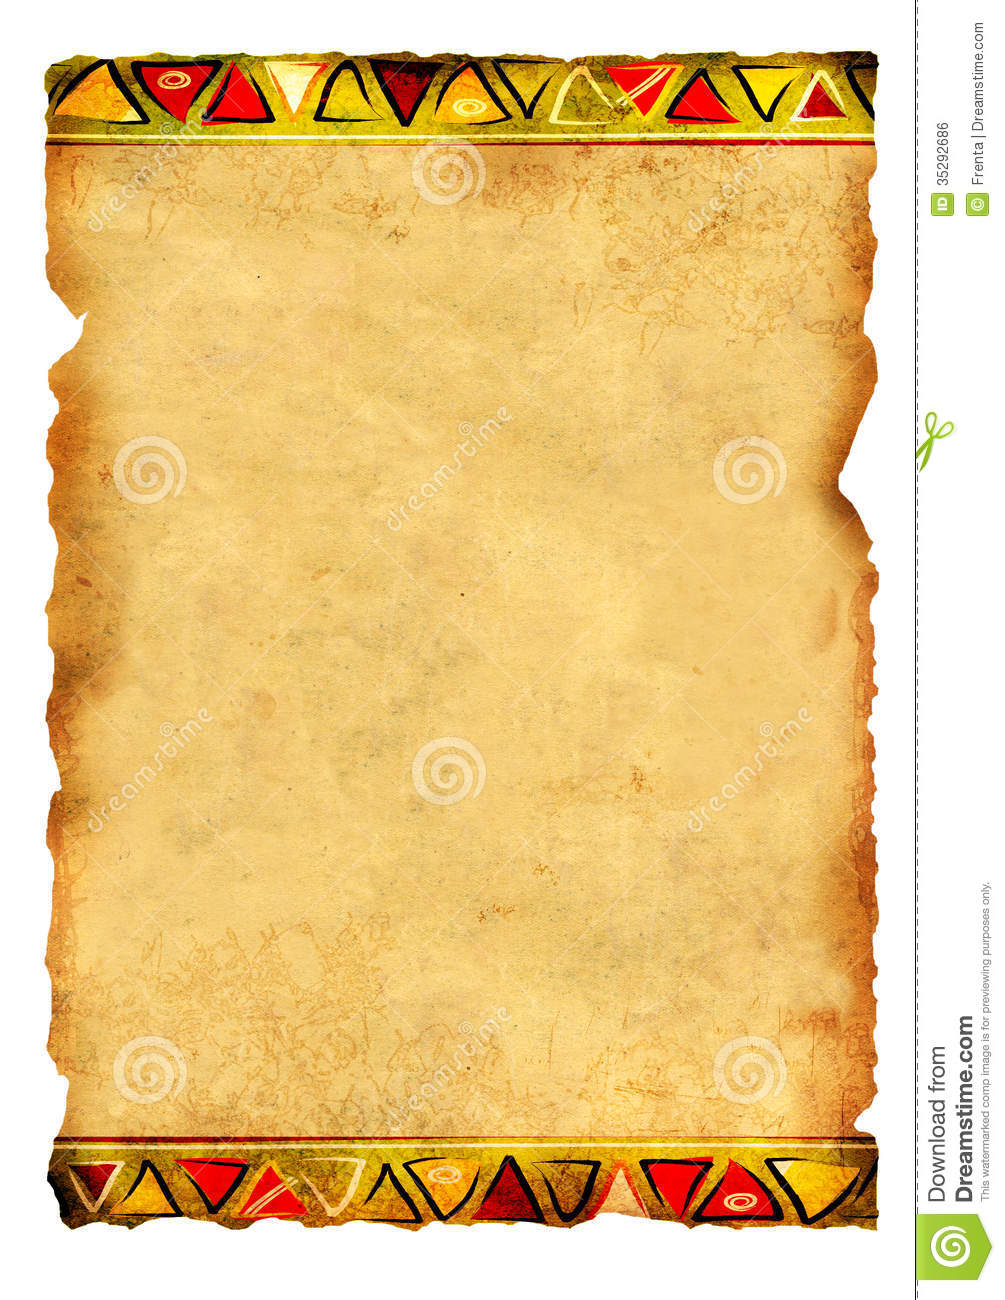 Old Parchment With African Traditional Patterns Royalty Free Stock